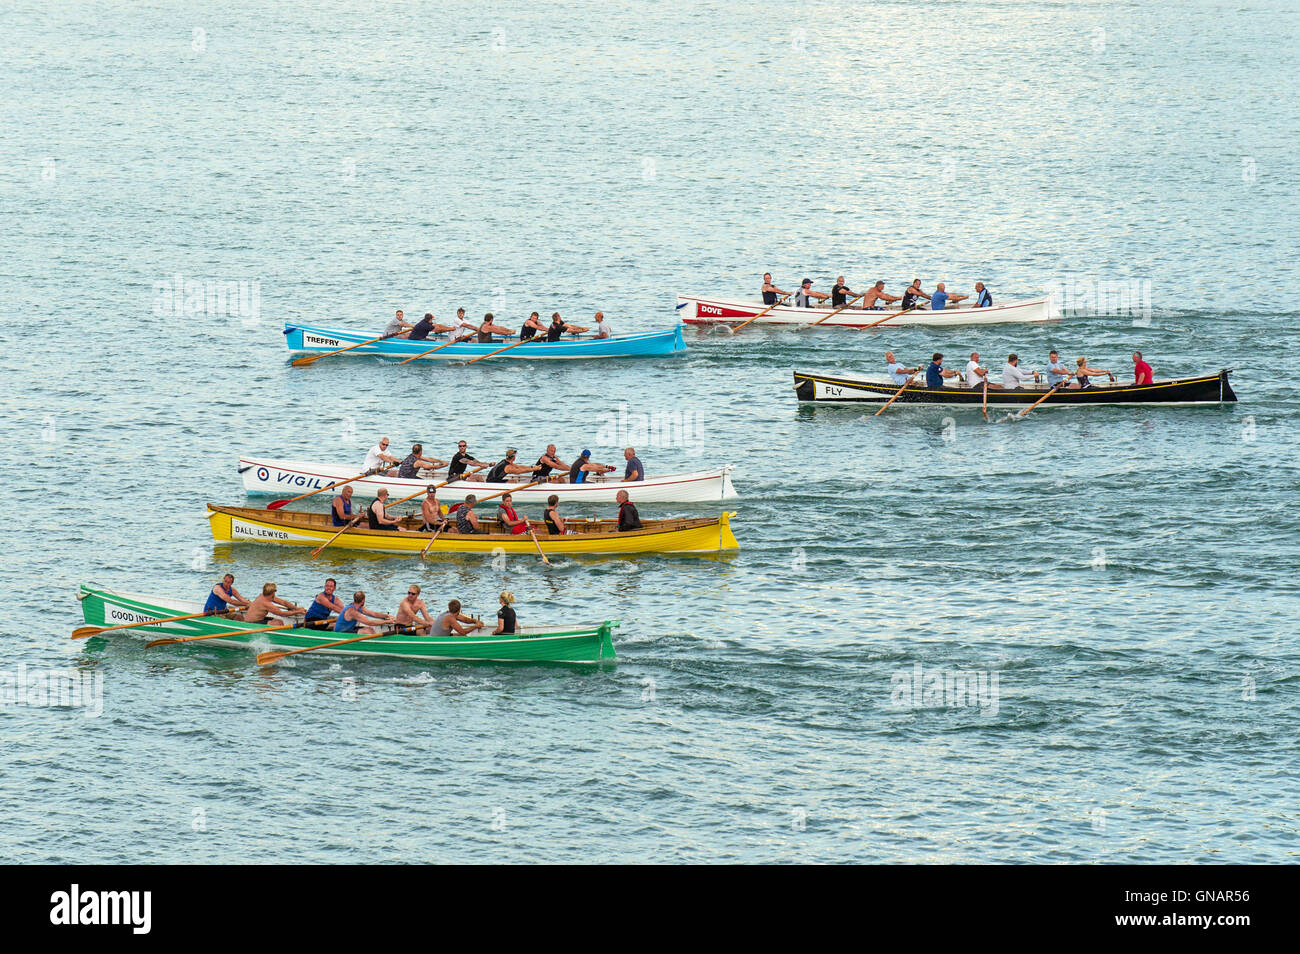 A traditional Cornish Pilot Gig race in Newquay, Cornwall. Stock Photo